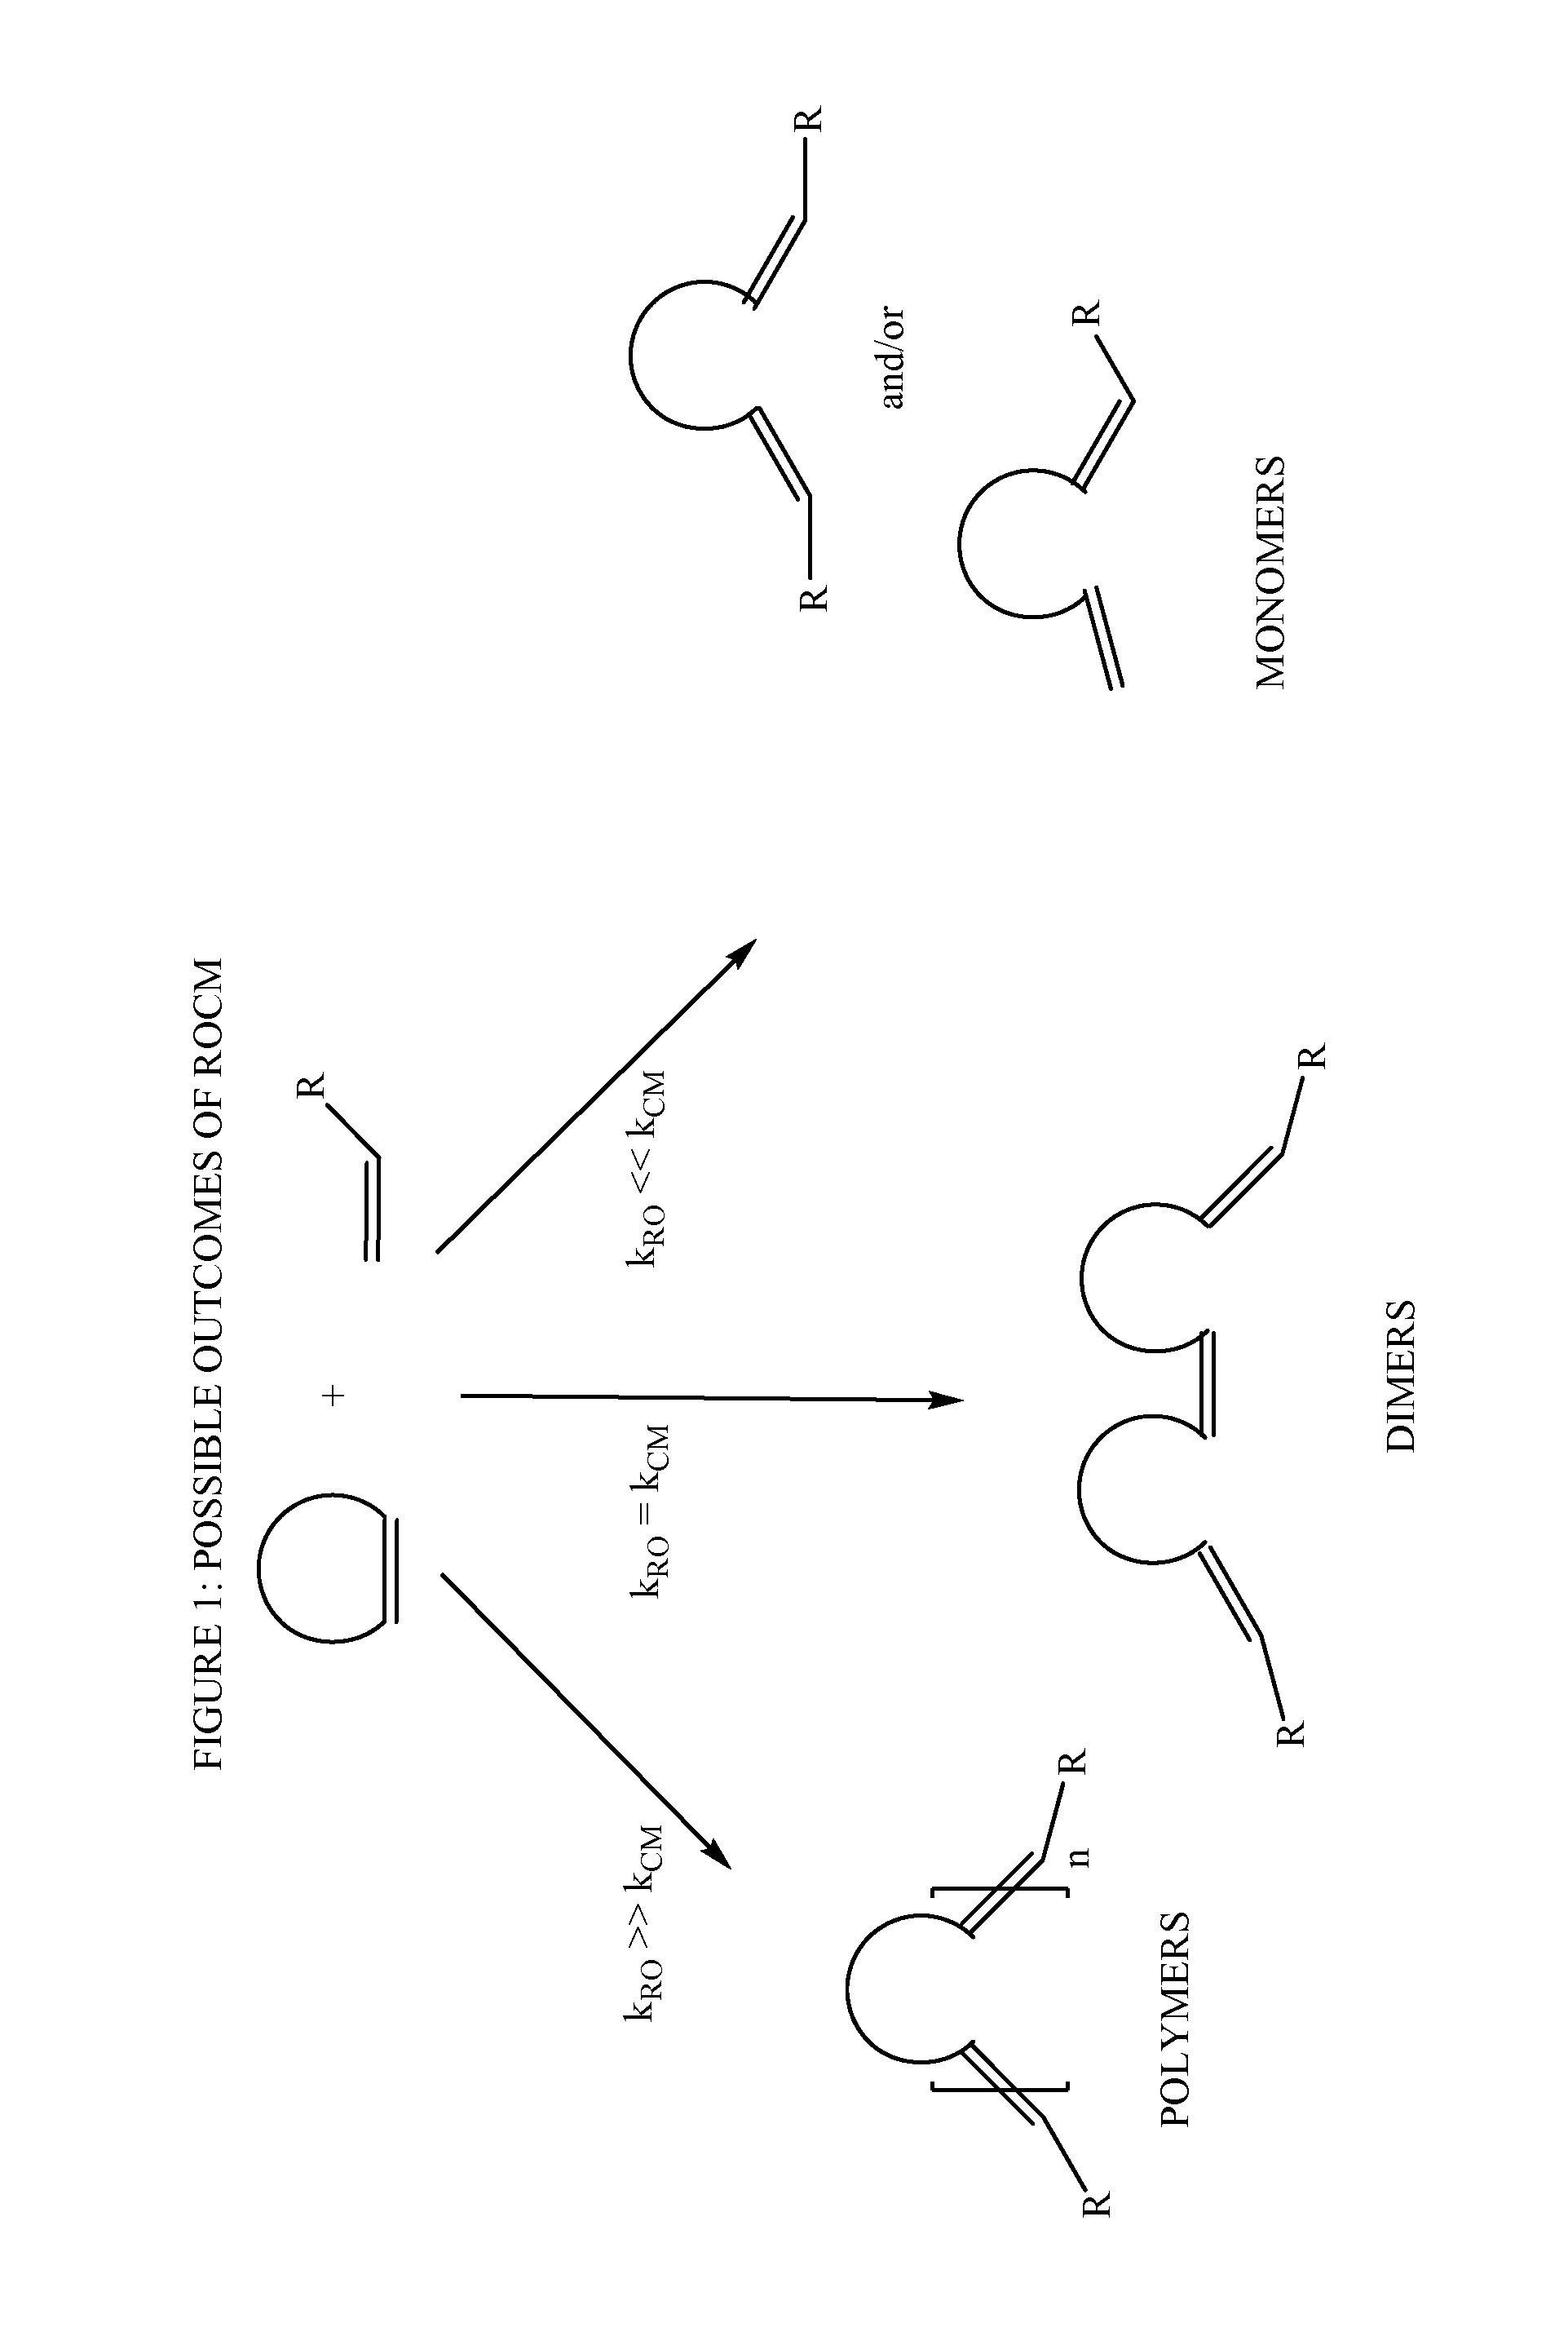 Novel Class Of Olefin Metathesis Catalysts, Methods Of Preparation, And Processes For The Use Thereof